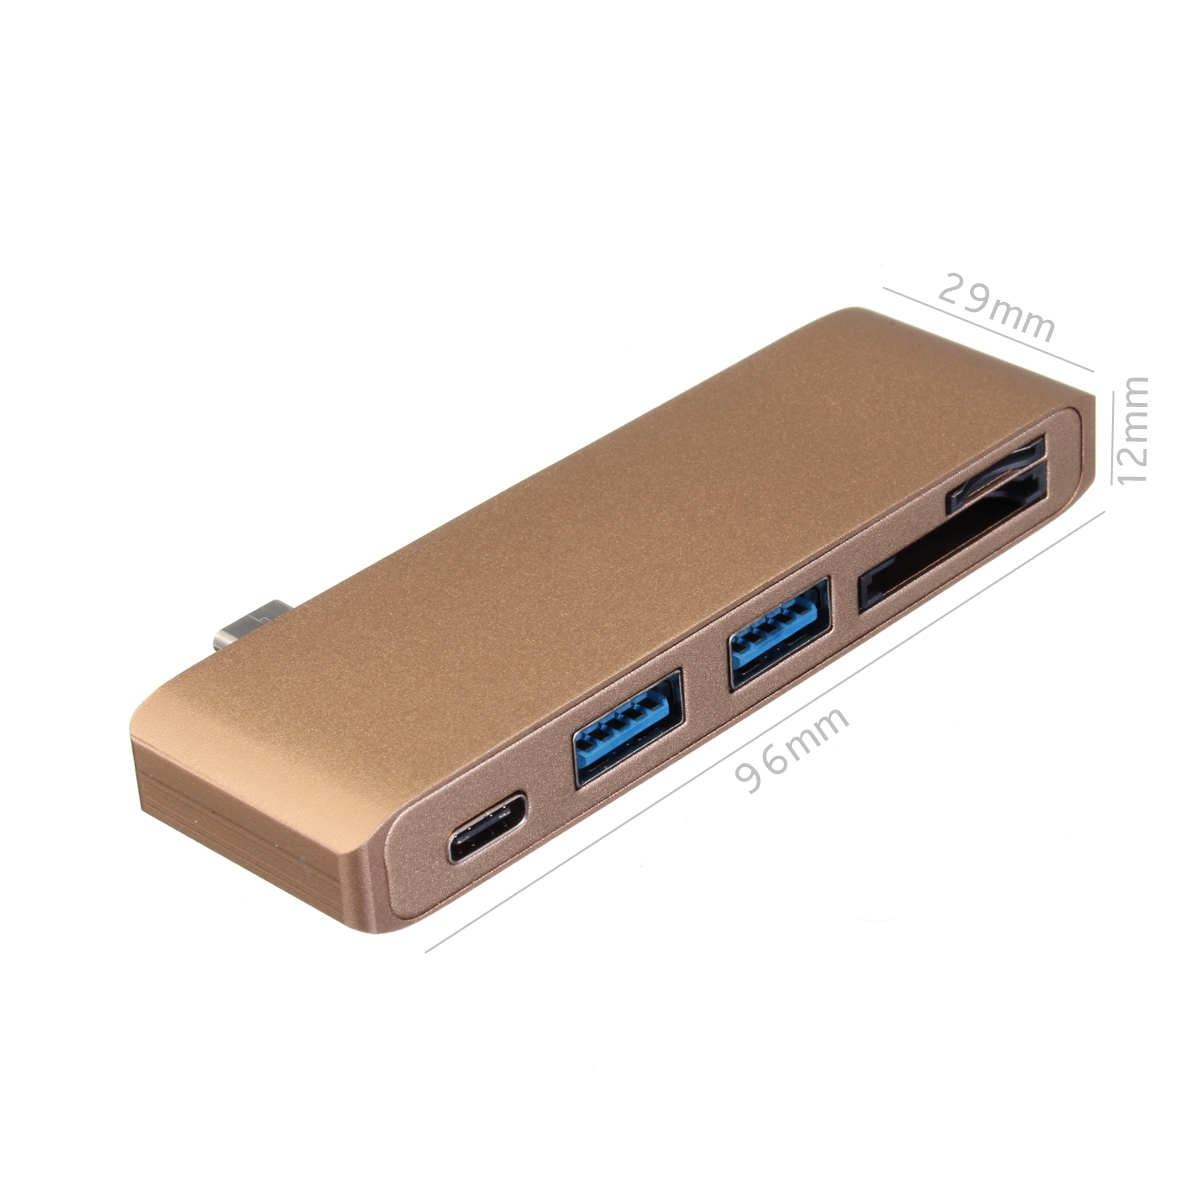 Multifunction-USB-Hub-Type-C-to-Type-C-USB-30-2Ports-TF-SD-Card-Reader-for-Laptop-PC-1153671-2